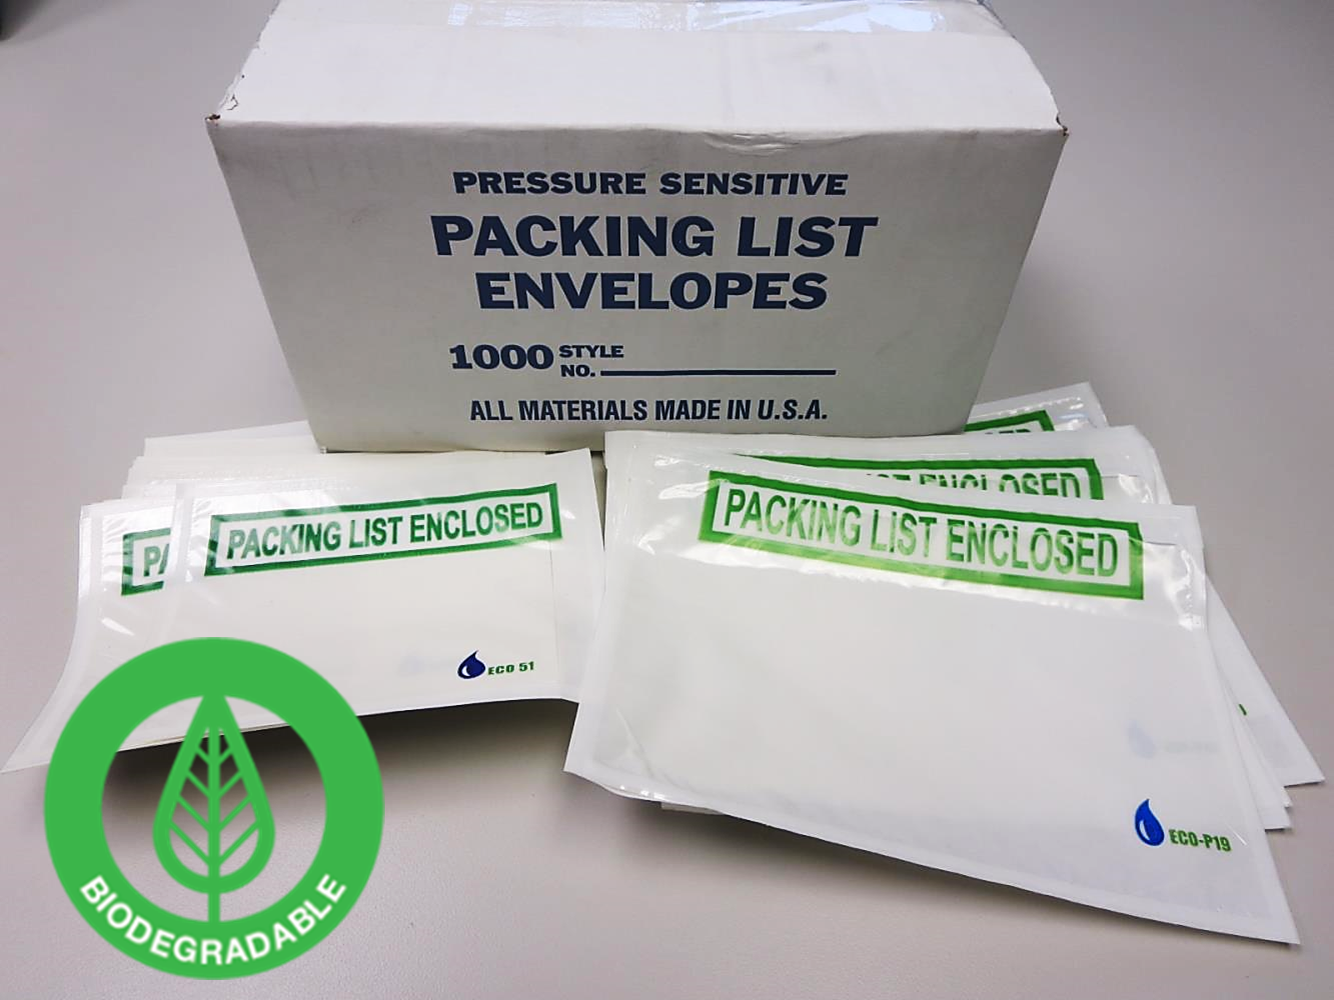 These 4.5" x 5.5" slips meet ASTM D5511 standards while the ECO-ADM technology brings shippers and corporations enhanced biodegradable packaging supplies to make an impact in the earth friendly environmental movement.